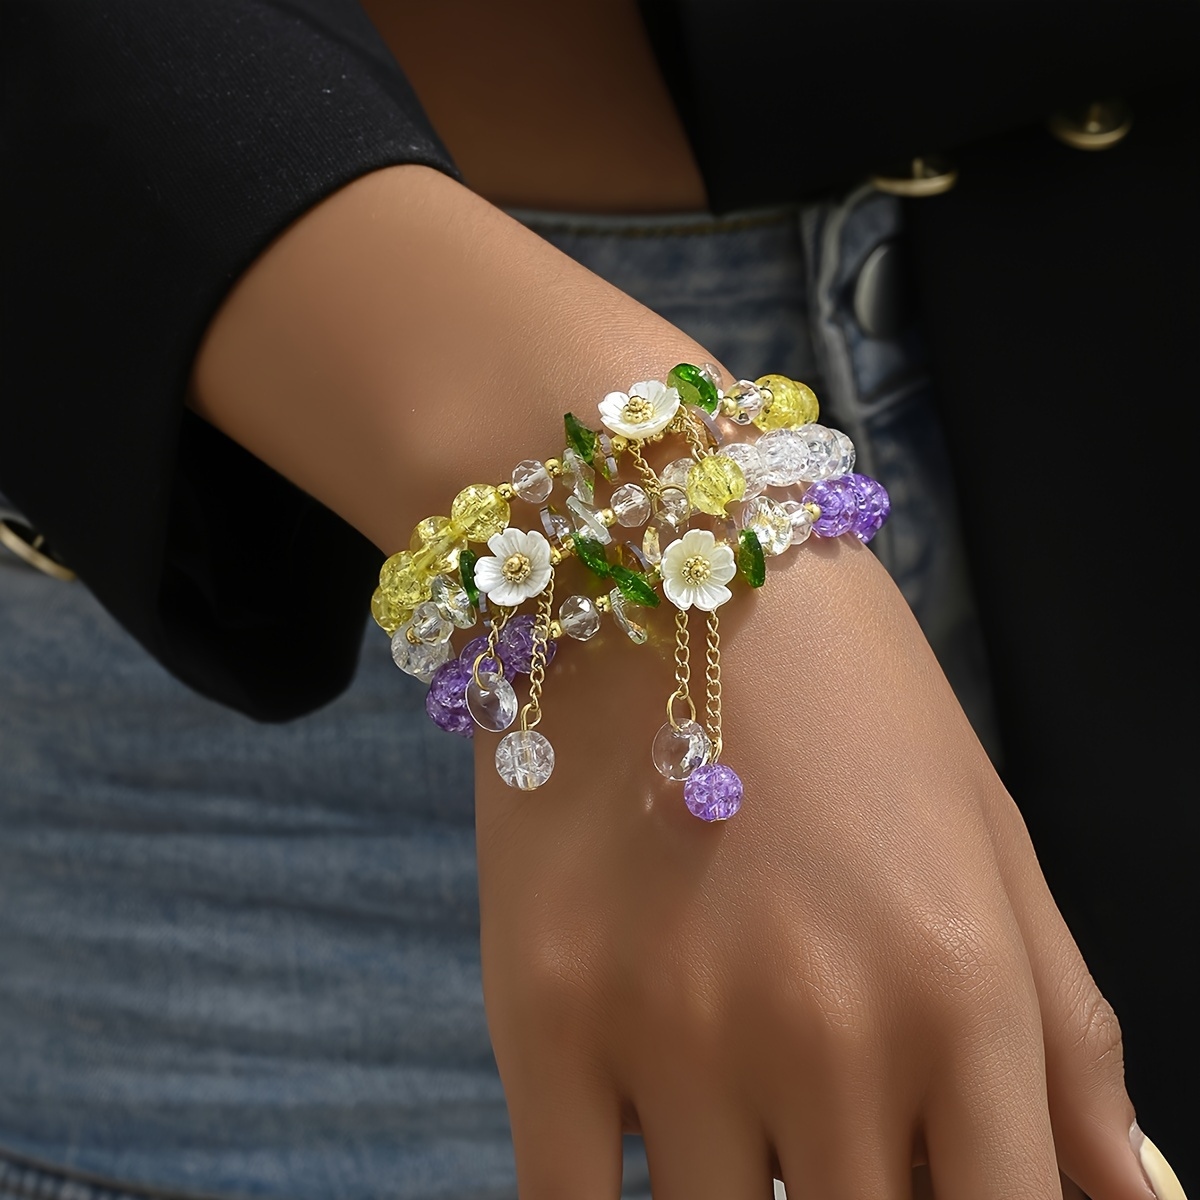 

3pcs Yellow & White & Purple Faux Crystal Beads Beaded Bracelet Set Cute Lovely Hand String With Flower Beads